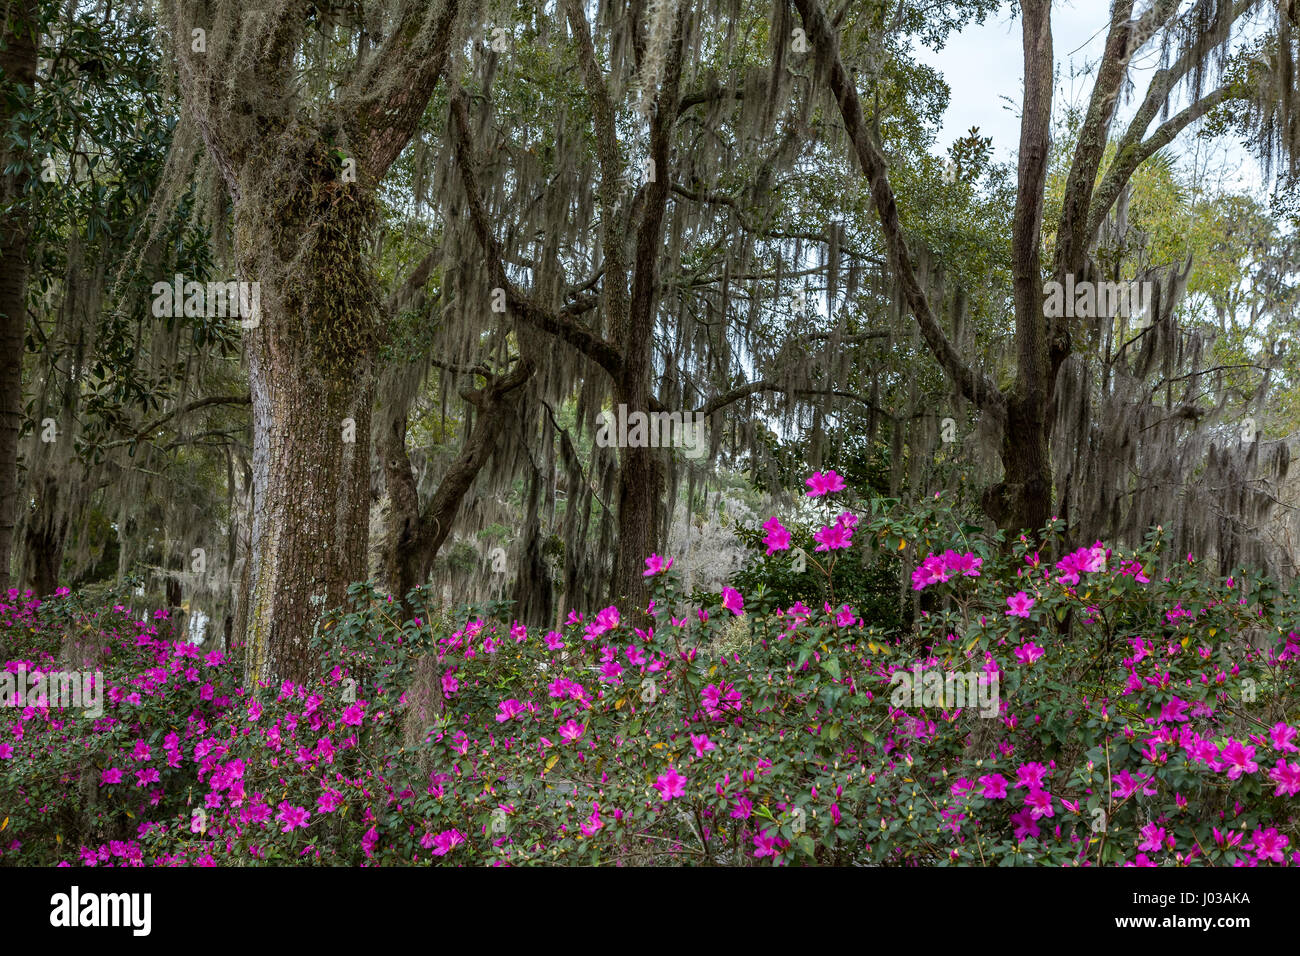 Azalea bushes and Live Oak trees filled with Spanish Moss line a gravel road in Savannah, Georgia. Stock Photo